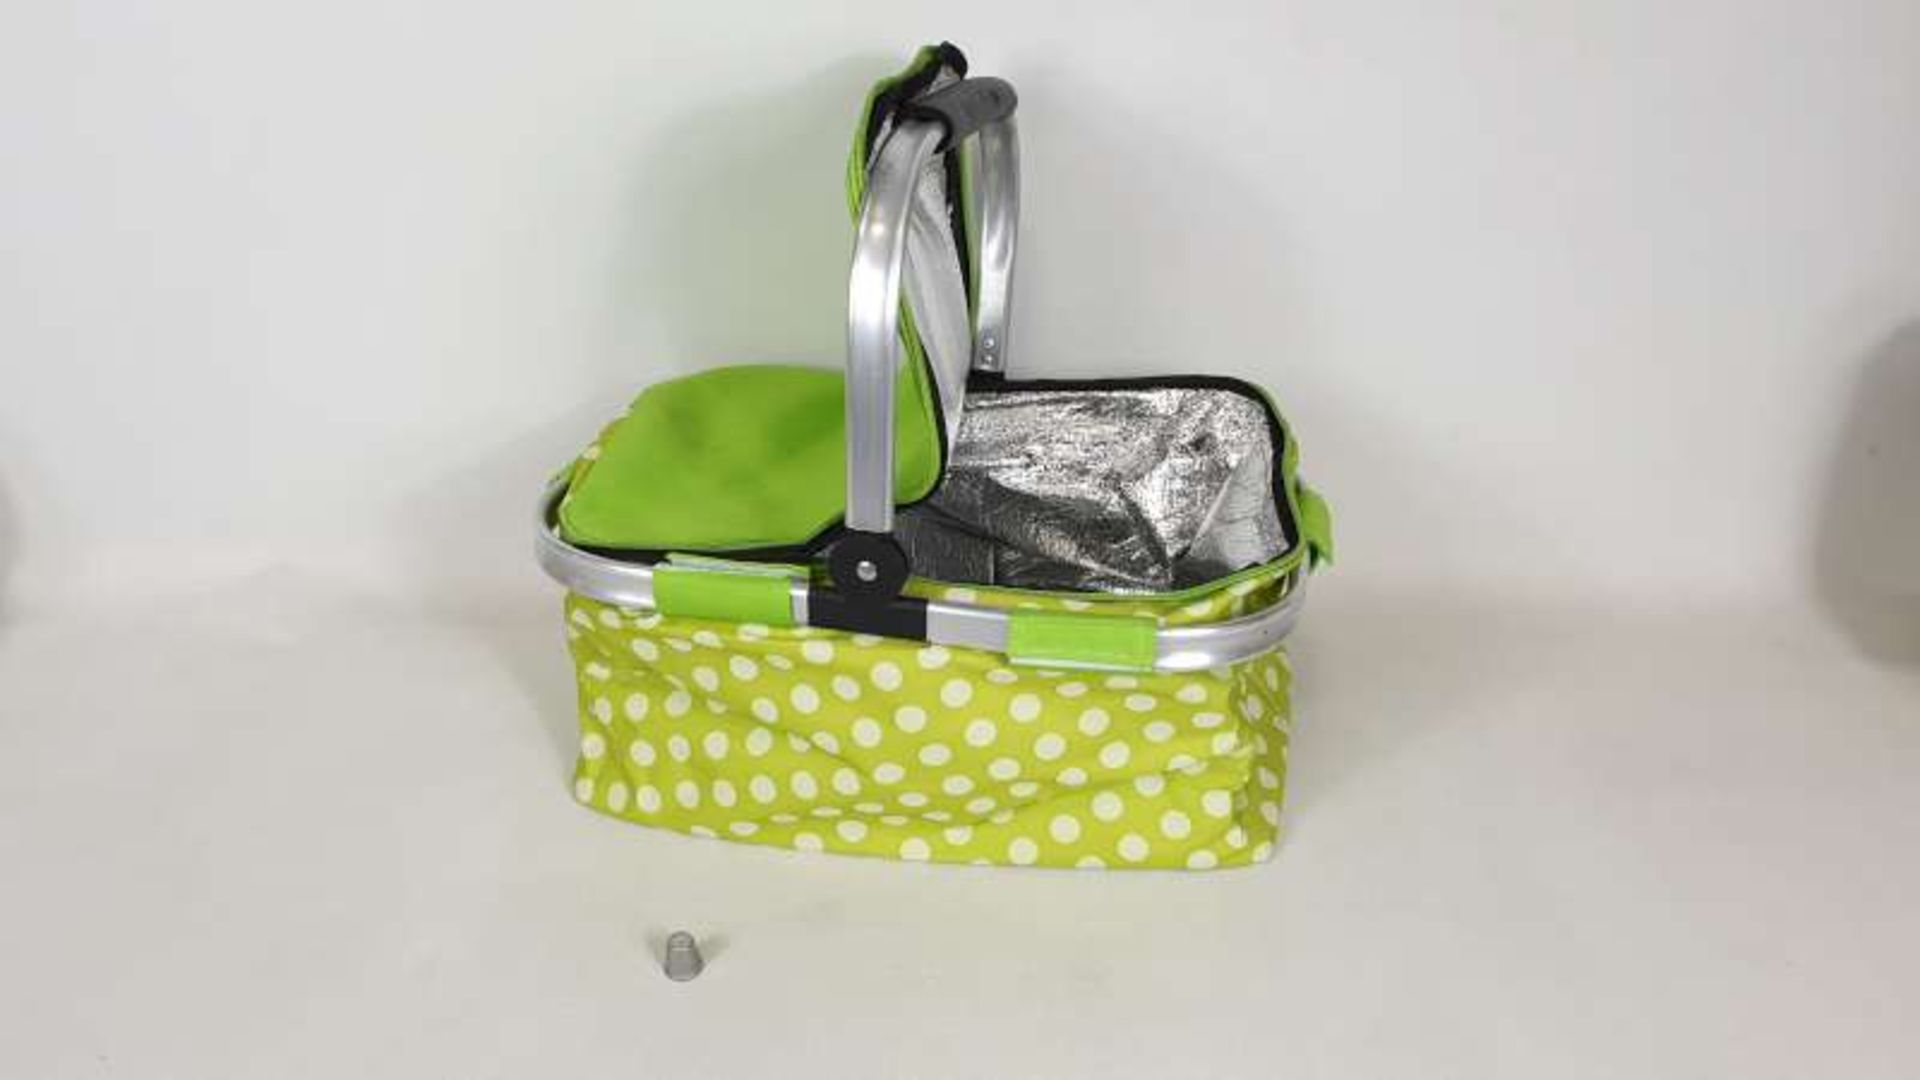 30 X LIME GREEN SPOTTY PICNIC BASKETS IN 3 BOXES